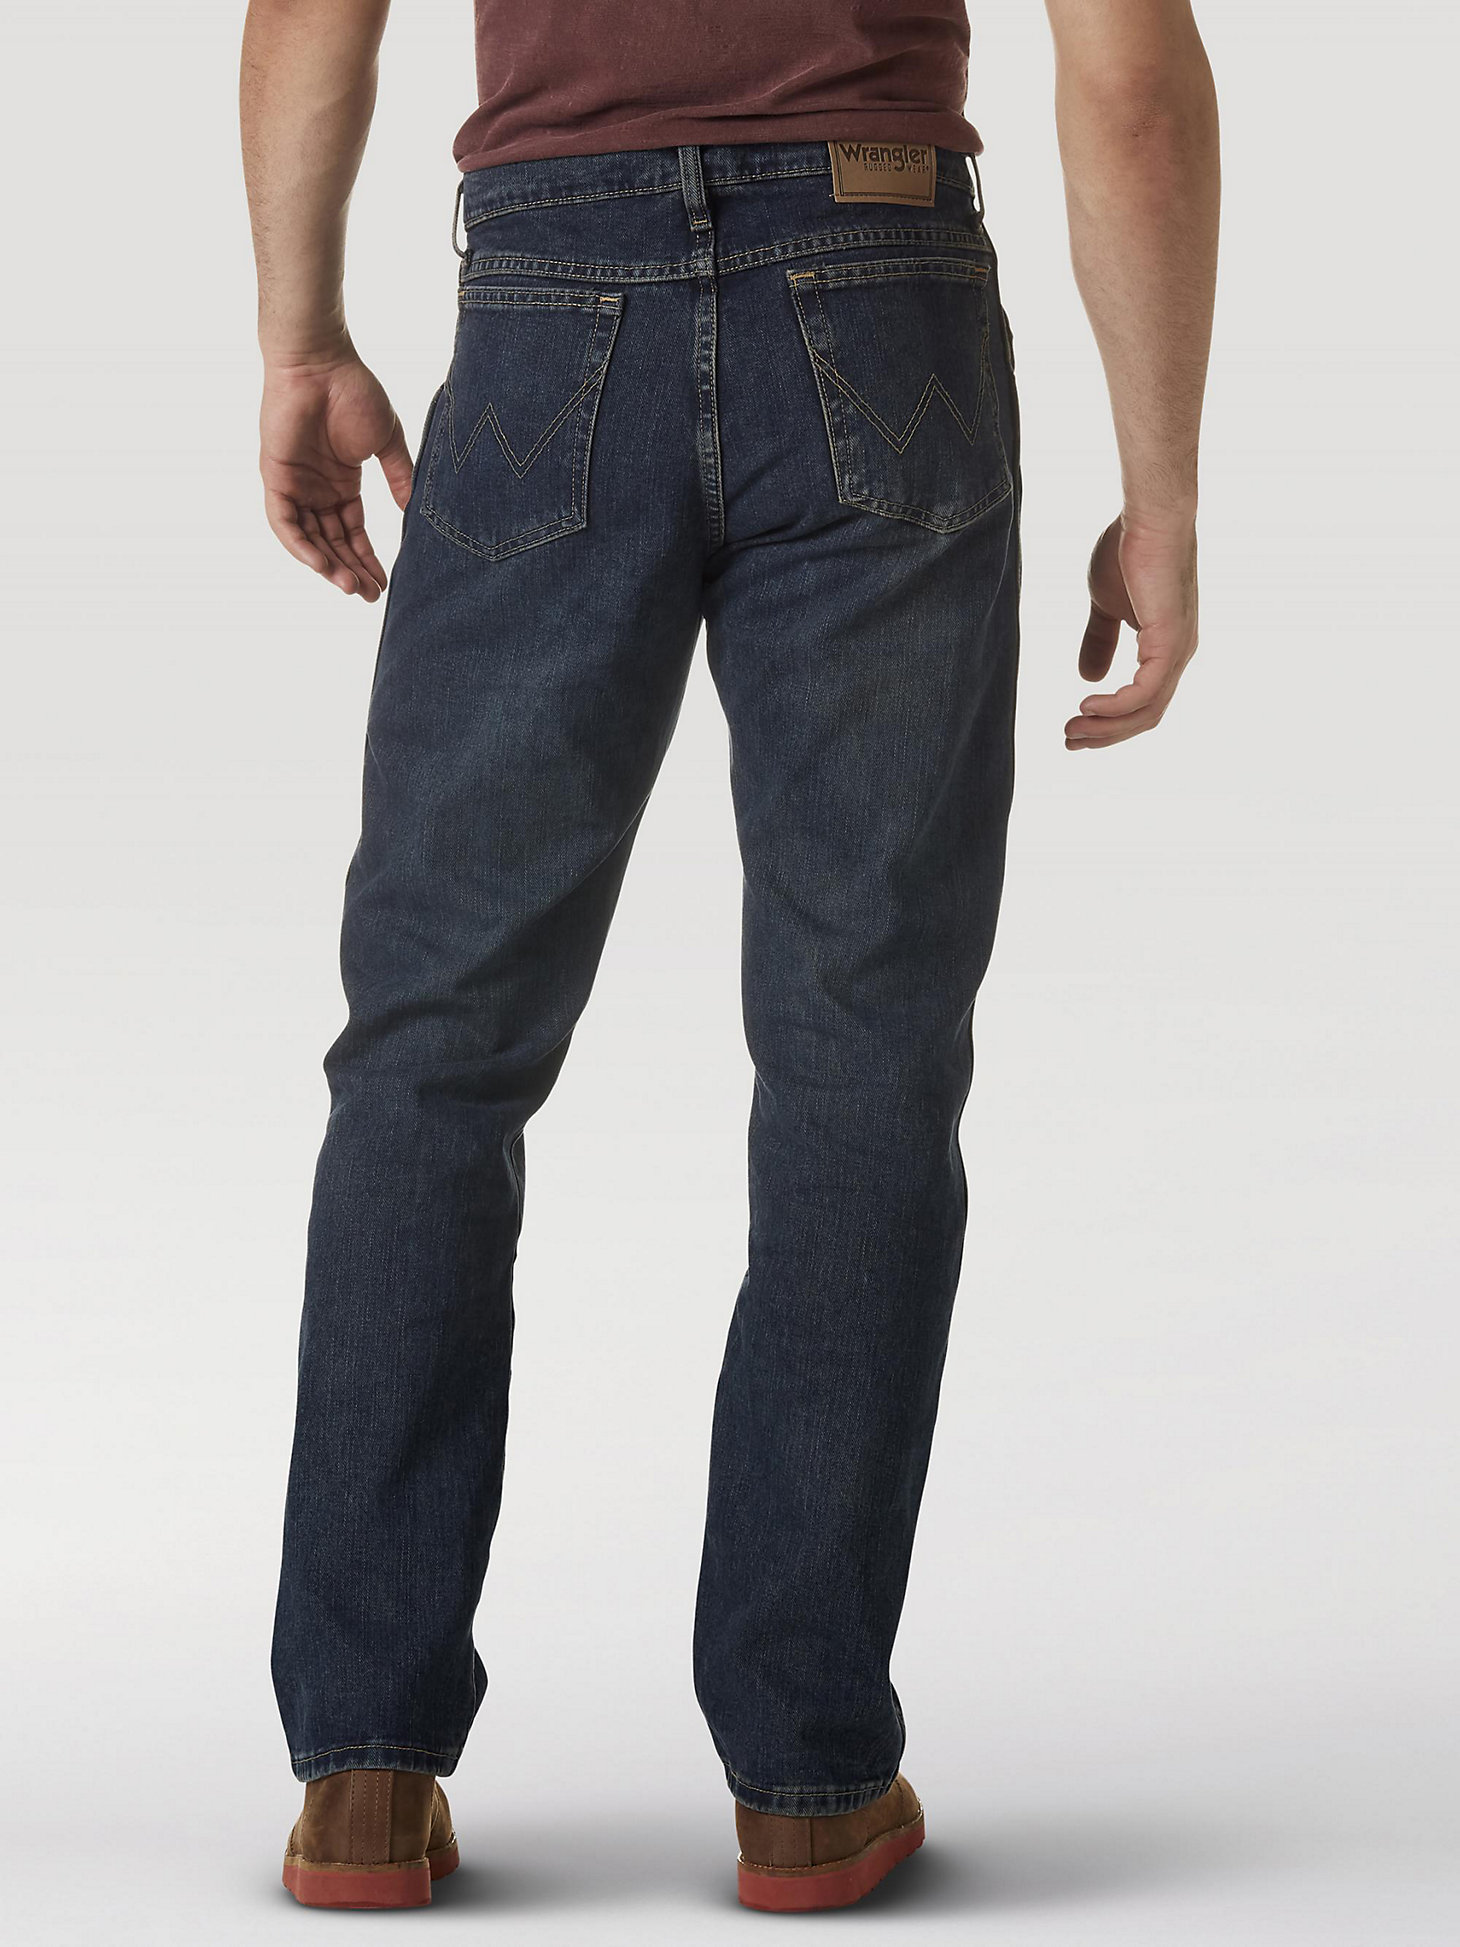 Wrangler Rugged Wear® Relaxed Fit Mid Rise Jean in Union alternative view 2